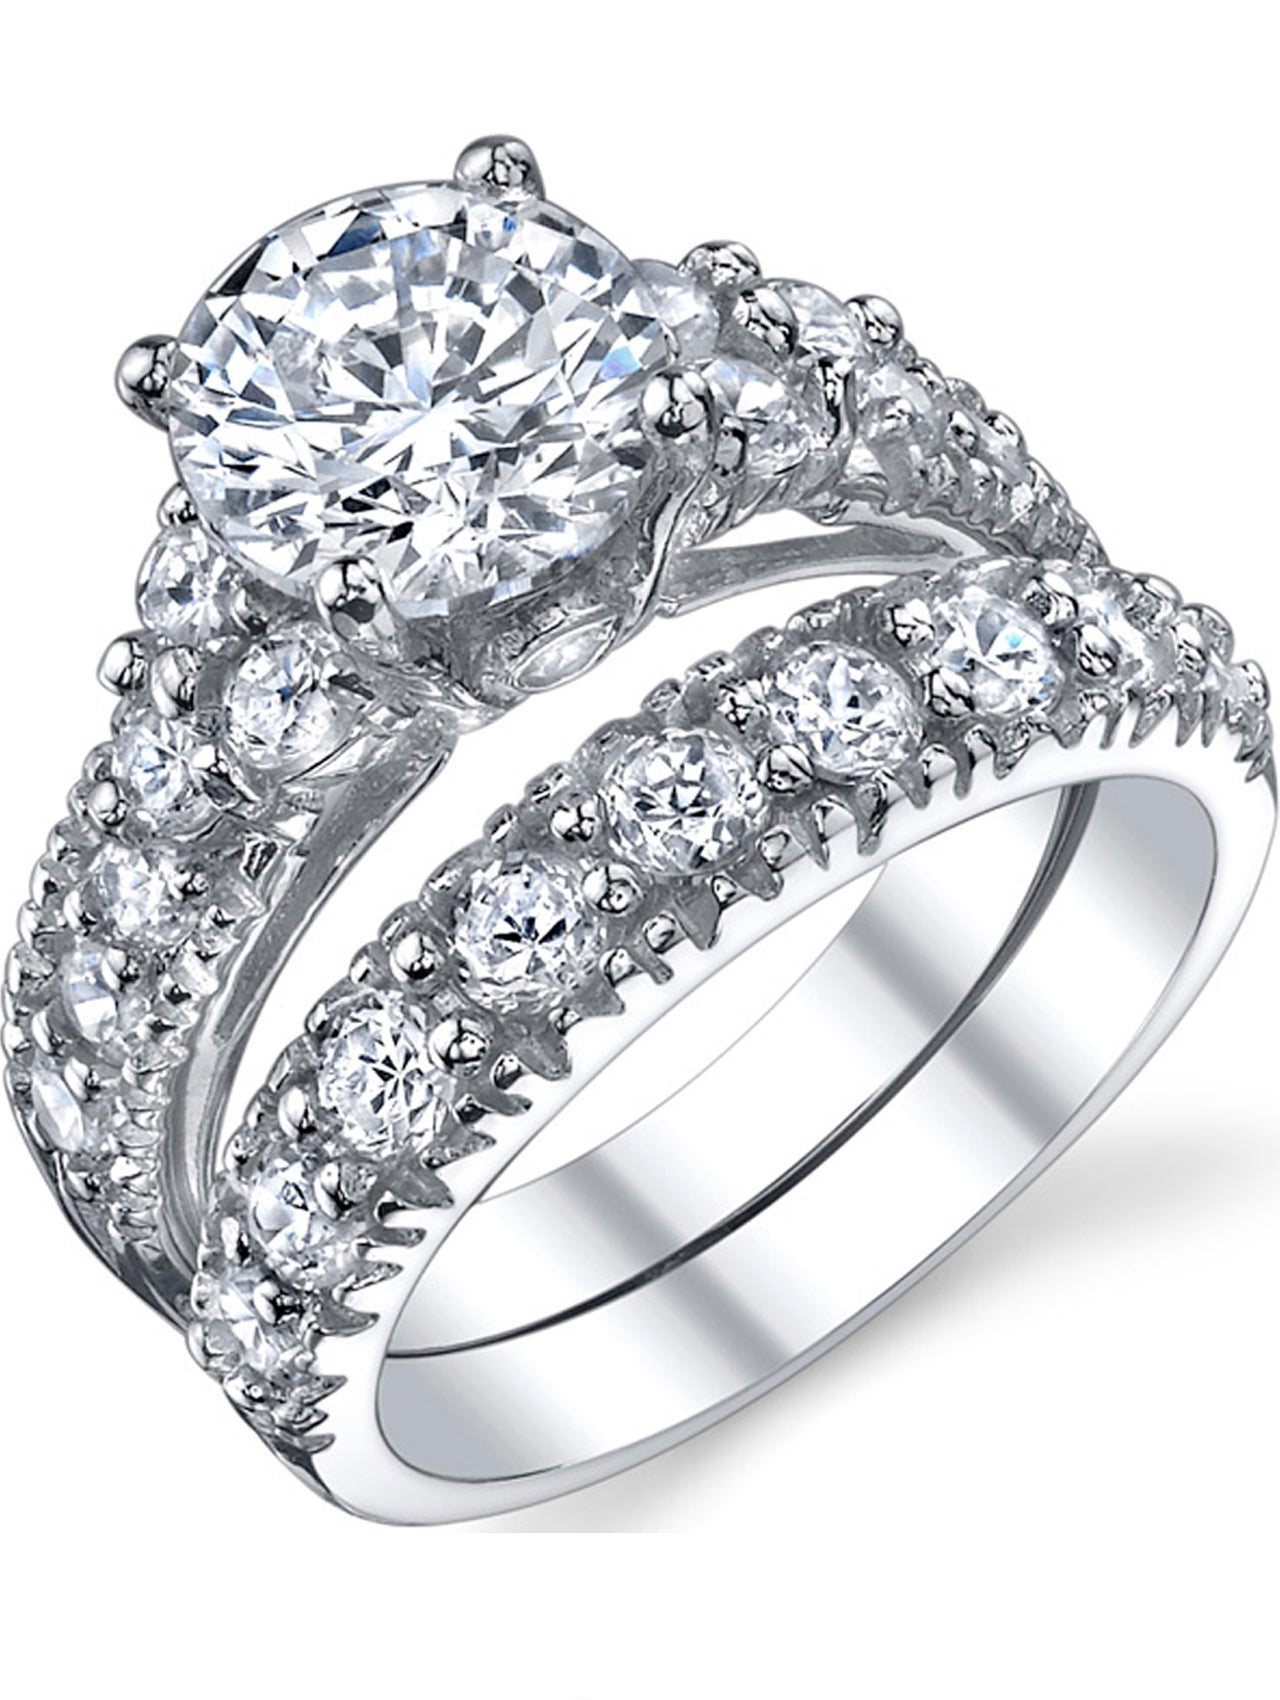 Women's Sterling Silver 925 Engagement Bridal Ring Set Cubic